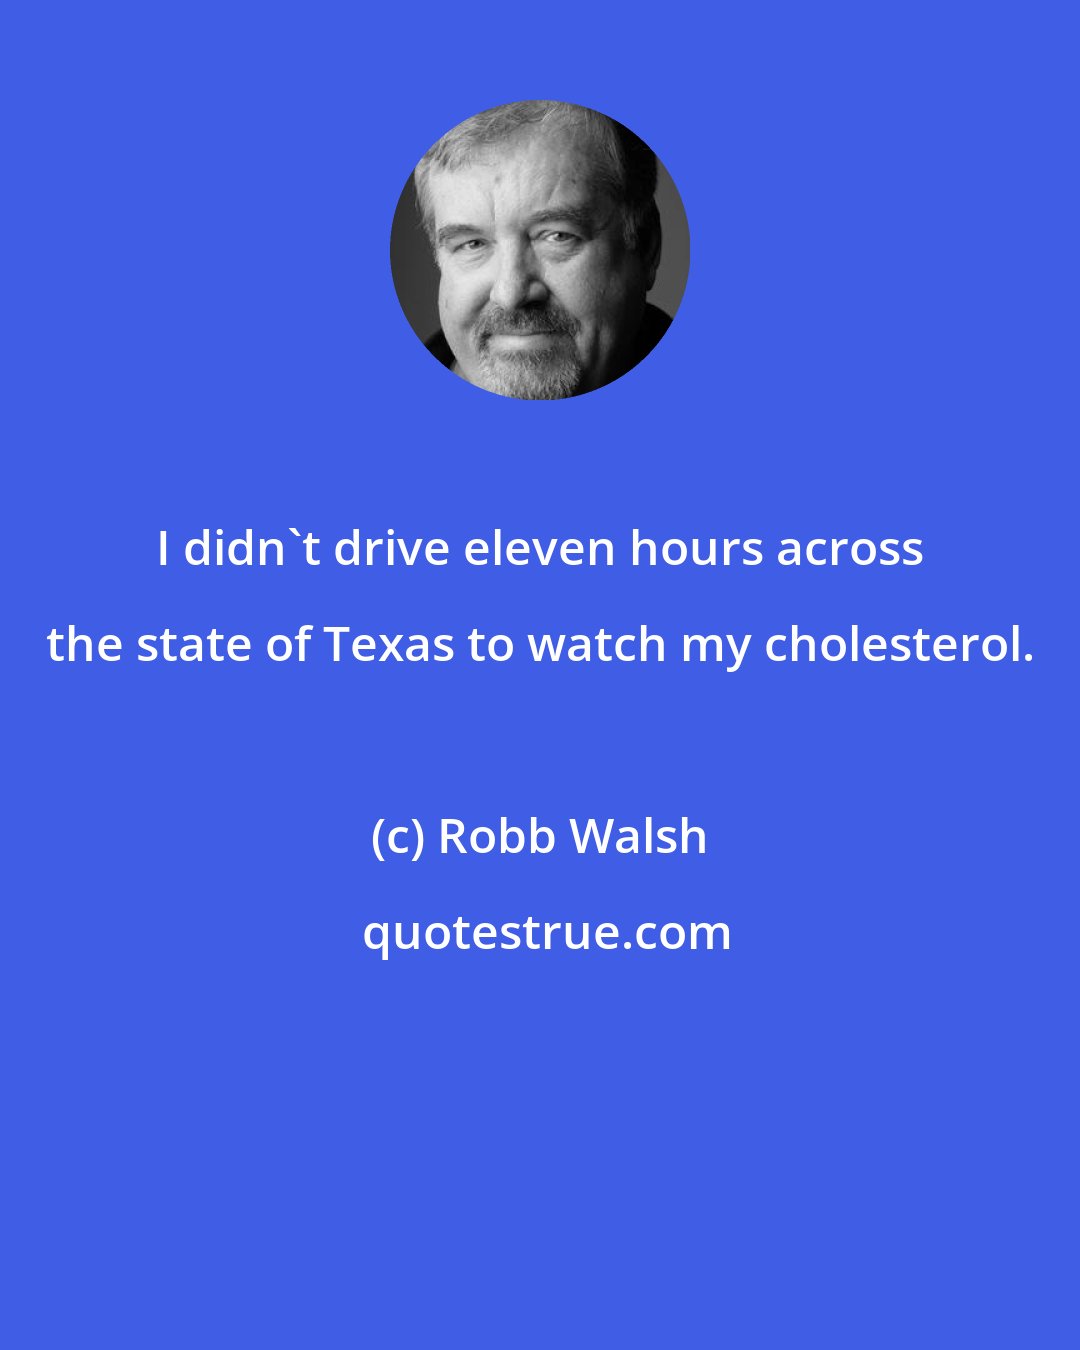 Robb Walsh: I didn't drive eleven hours across the state of Texas to watch my cholesterol.